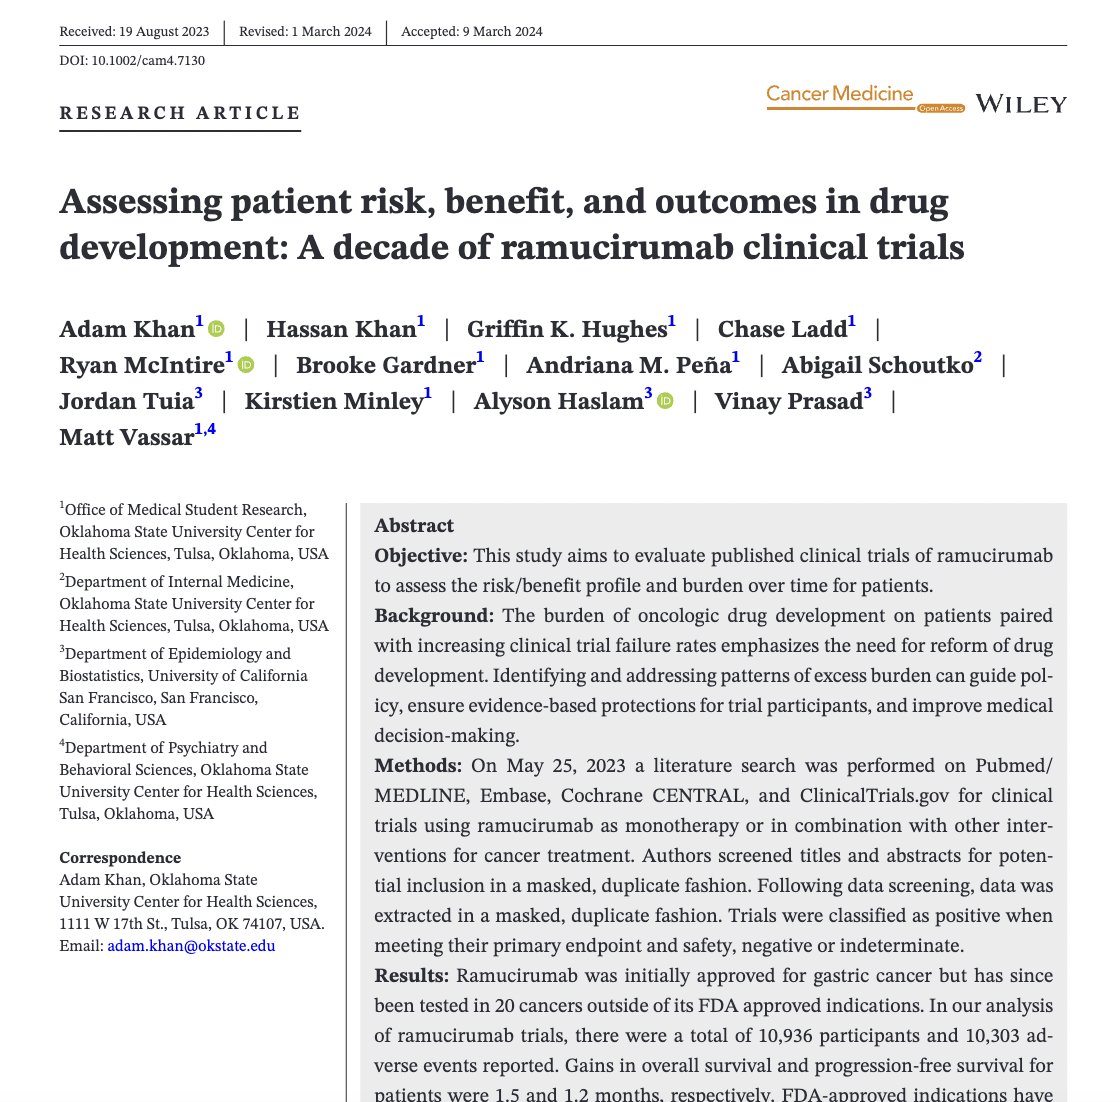 Assessing patient risk, benefit, and outcomes in drug development: A decade of ramucirumab clinical trials onlinelibrary.wiley.com/doi/10.1002/ca… via @VPrasadMDMPH et al